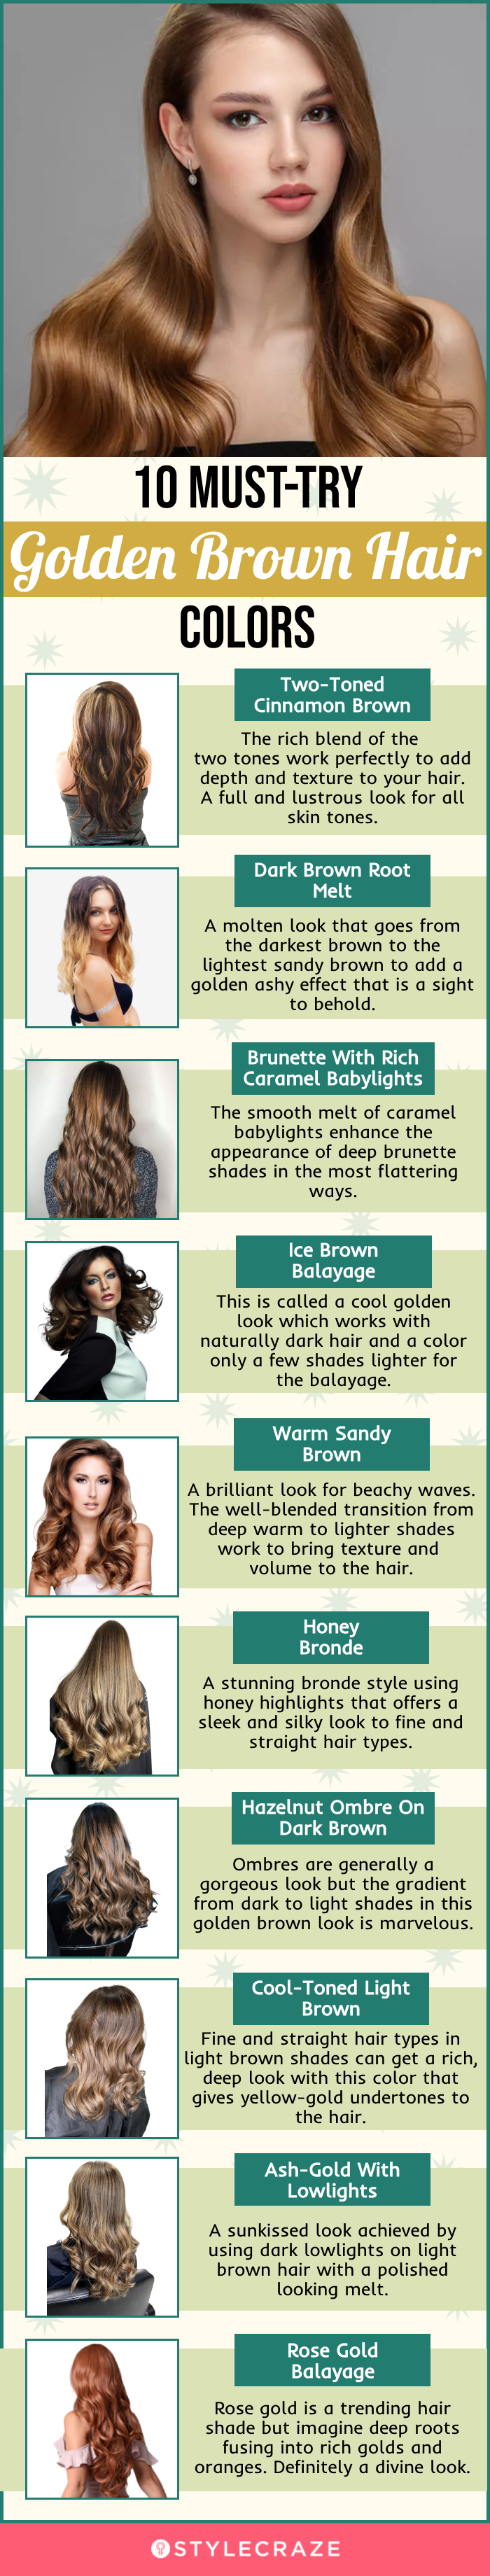 10 must try golden brown hair colors (infographic)